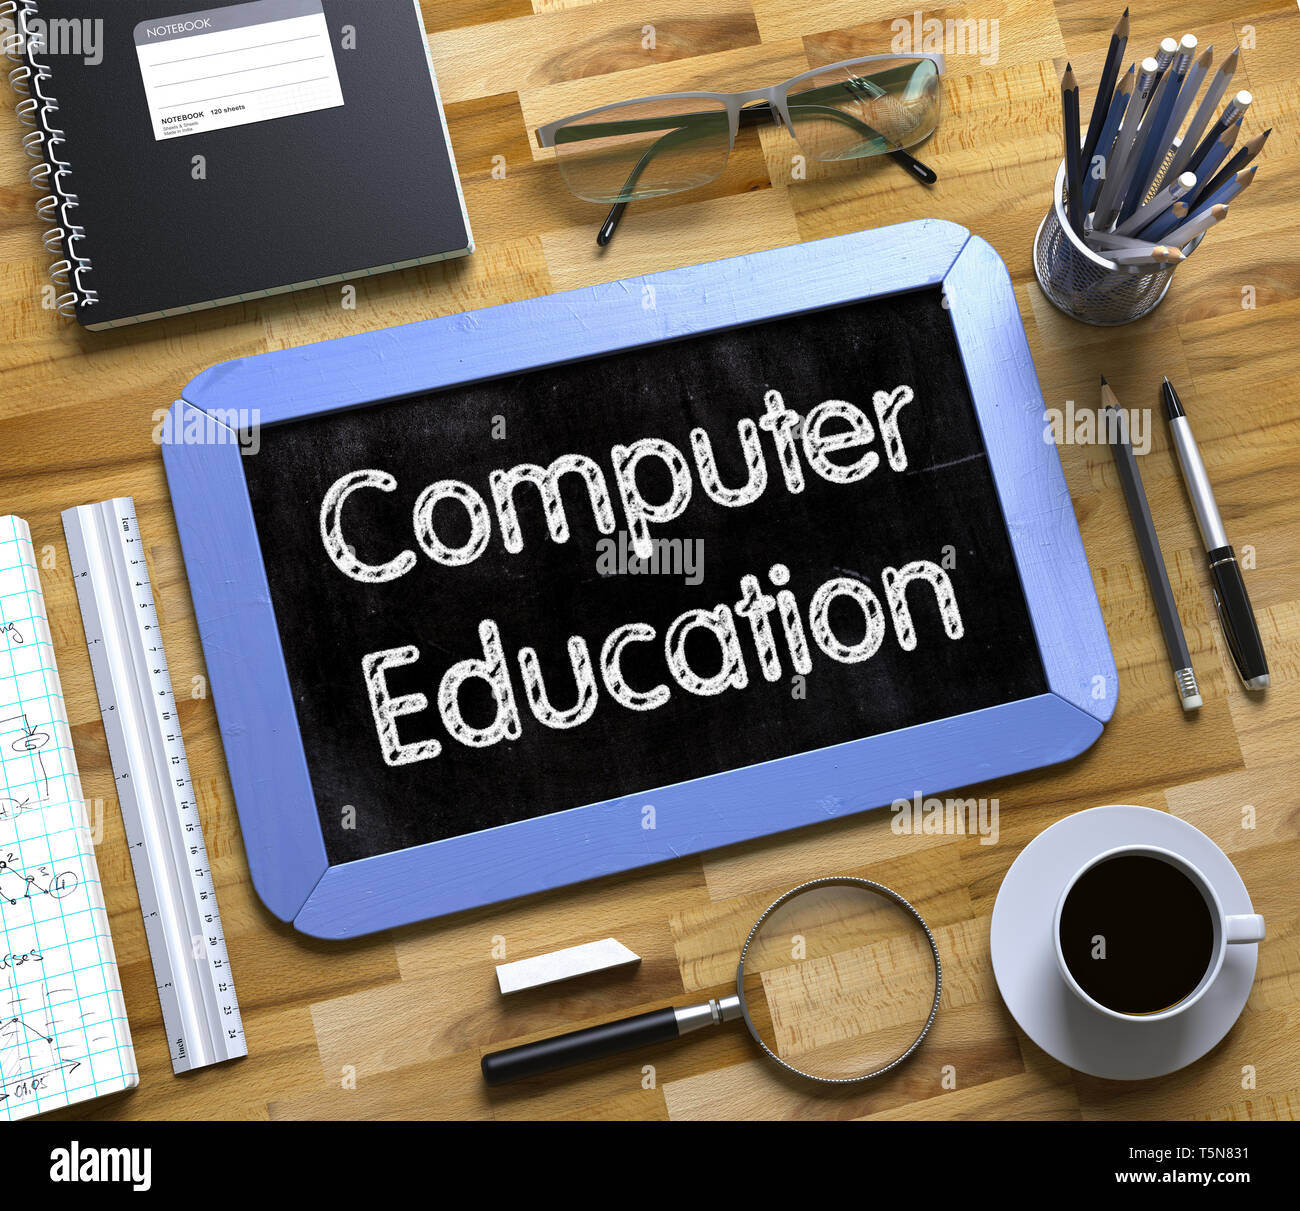 Computer Education - Text on Small Chalkboard.Computer Education Concept on Small Chalkboard. 3d Rendering. Stock Photo